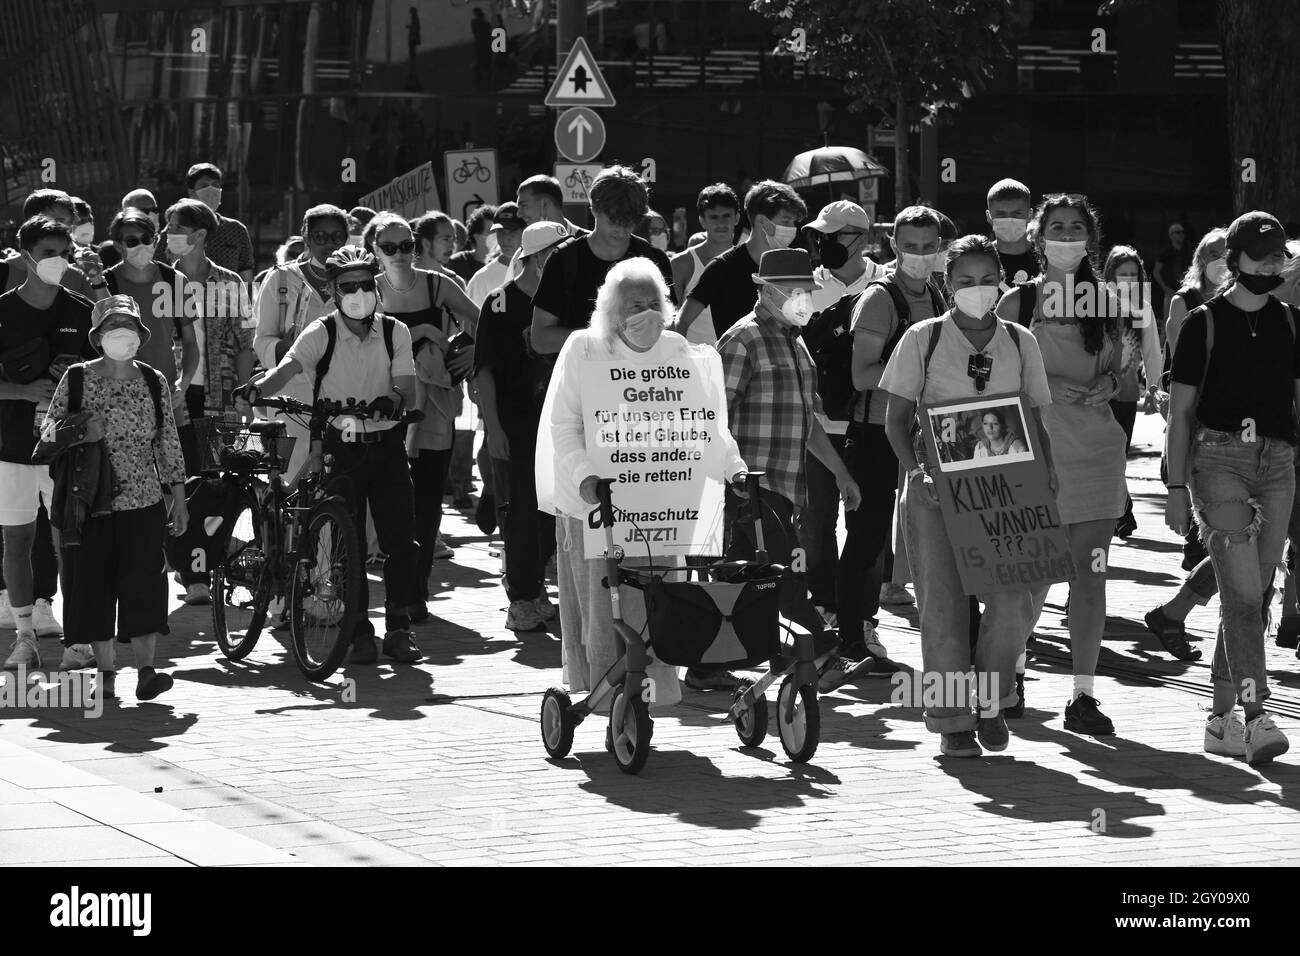 Young and old people march in Freiburg Germany Fridays for Future protest German climate activists demonstrate against global warming Stock Photo